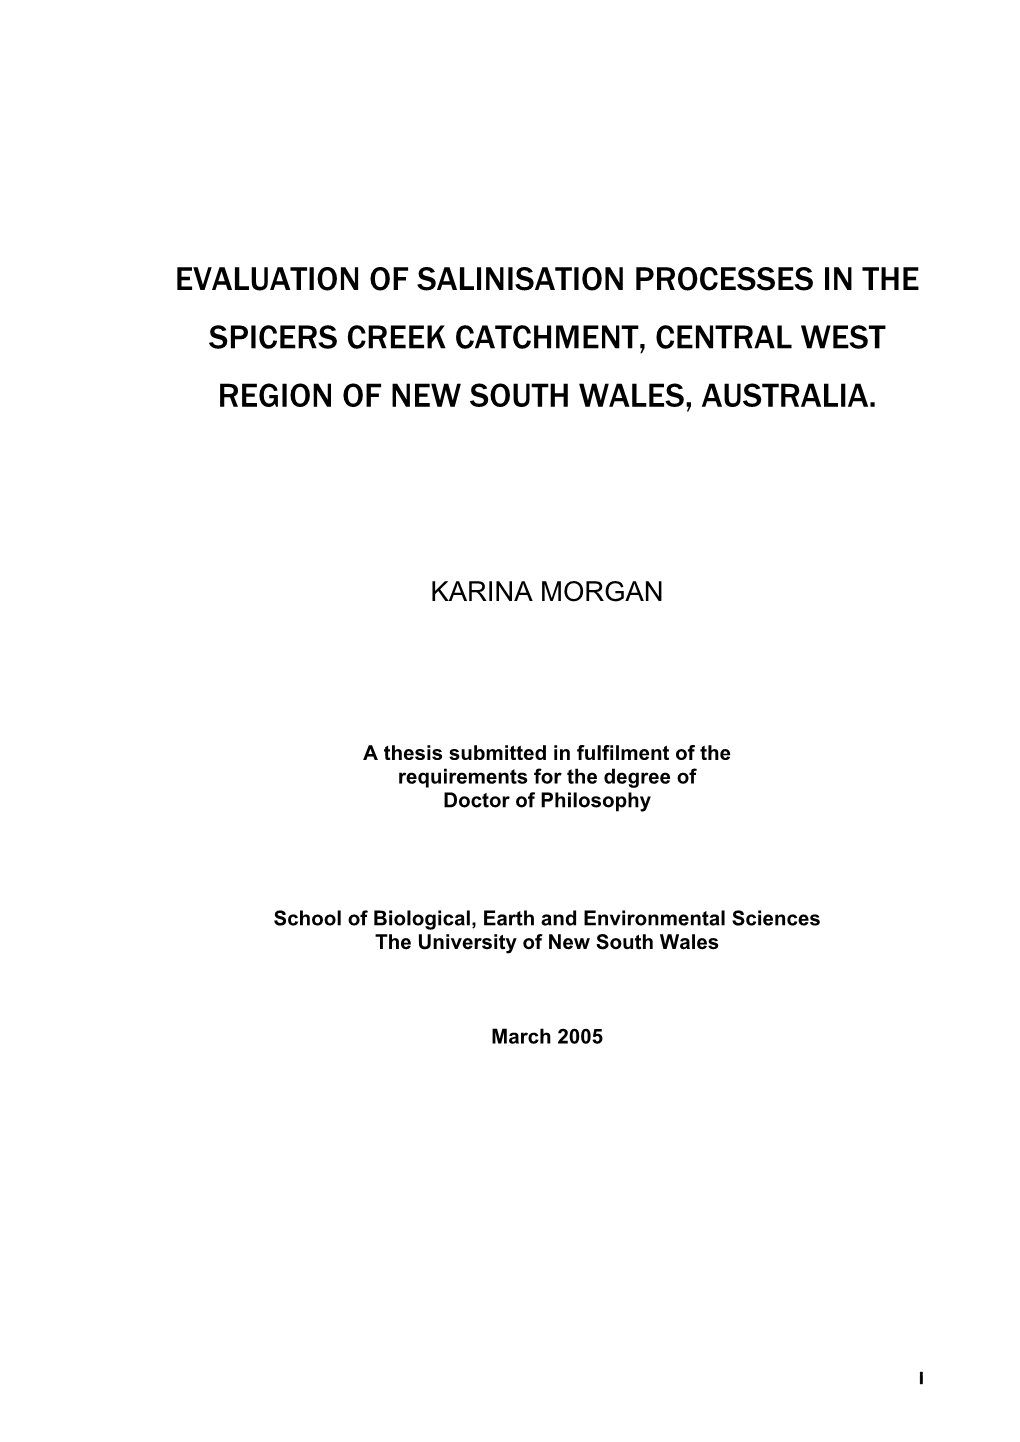 Evaluation of Salinisation Processes in the Spicers Creek Catchment, Central West Region of New South Wales, Australia